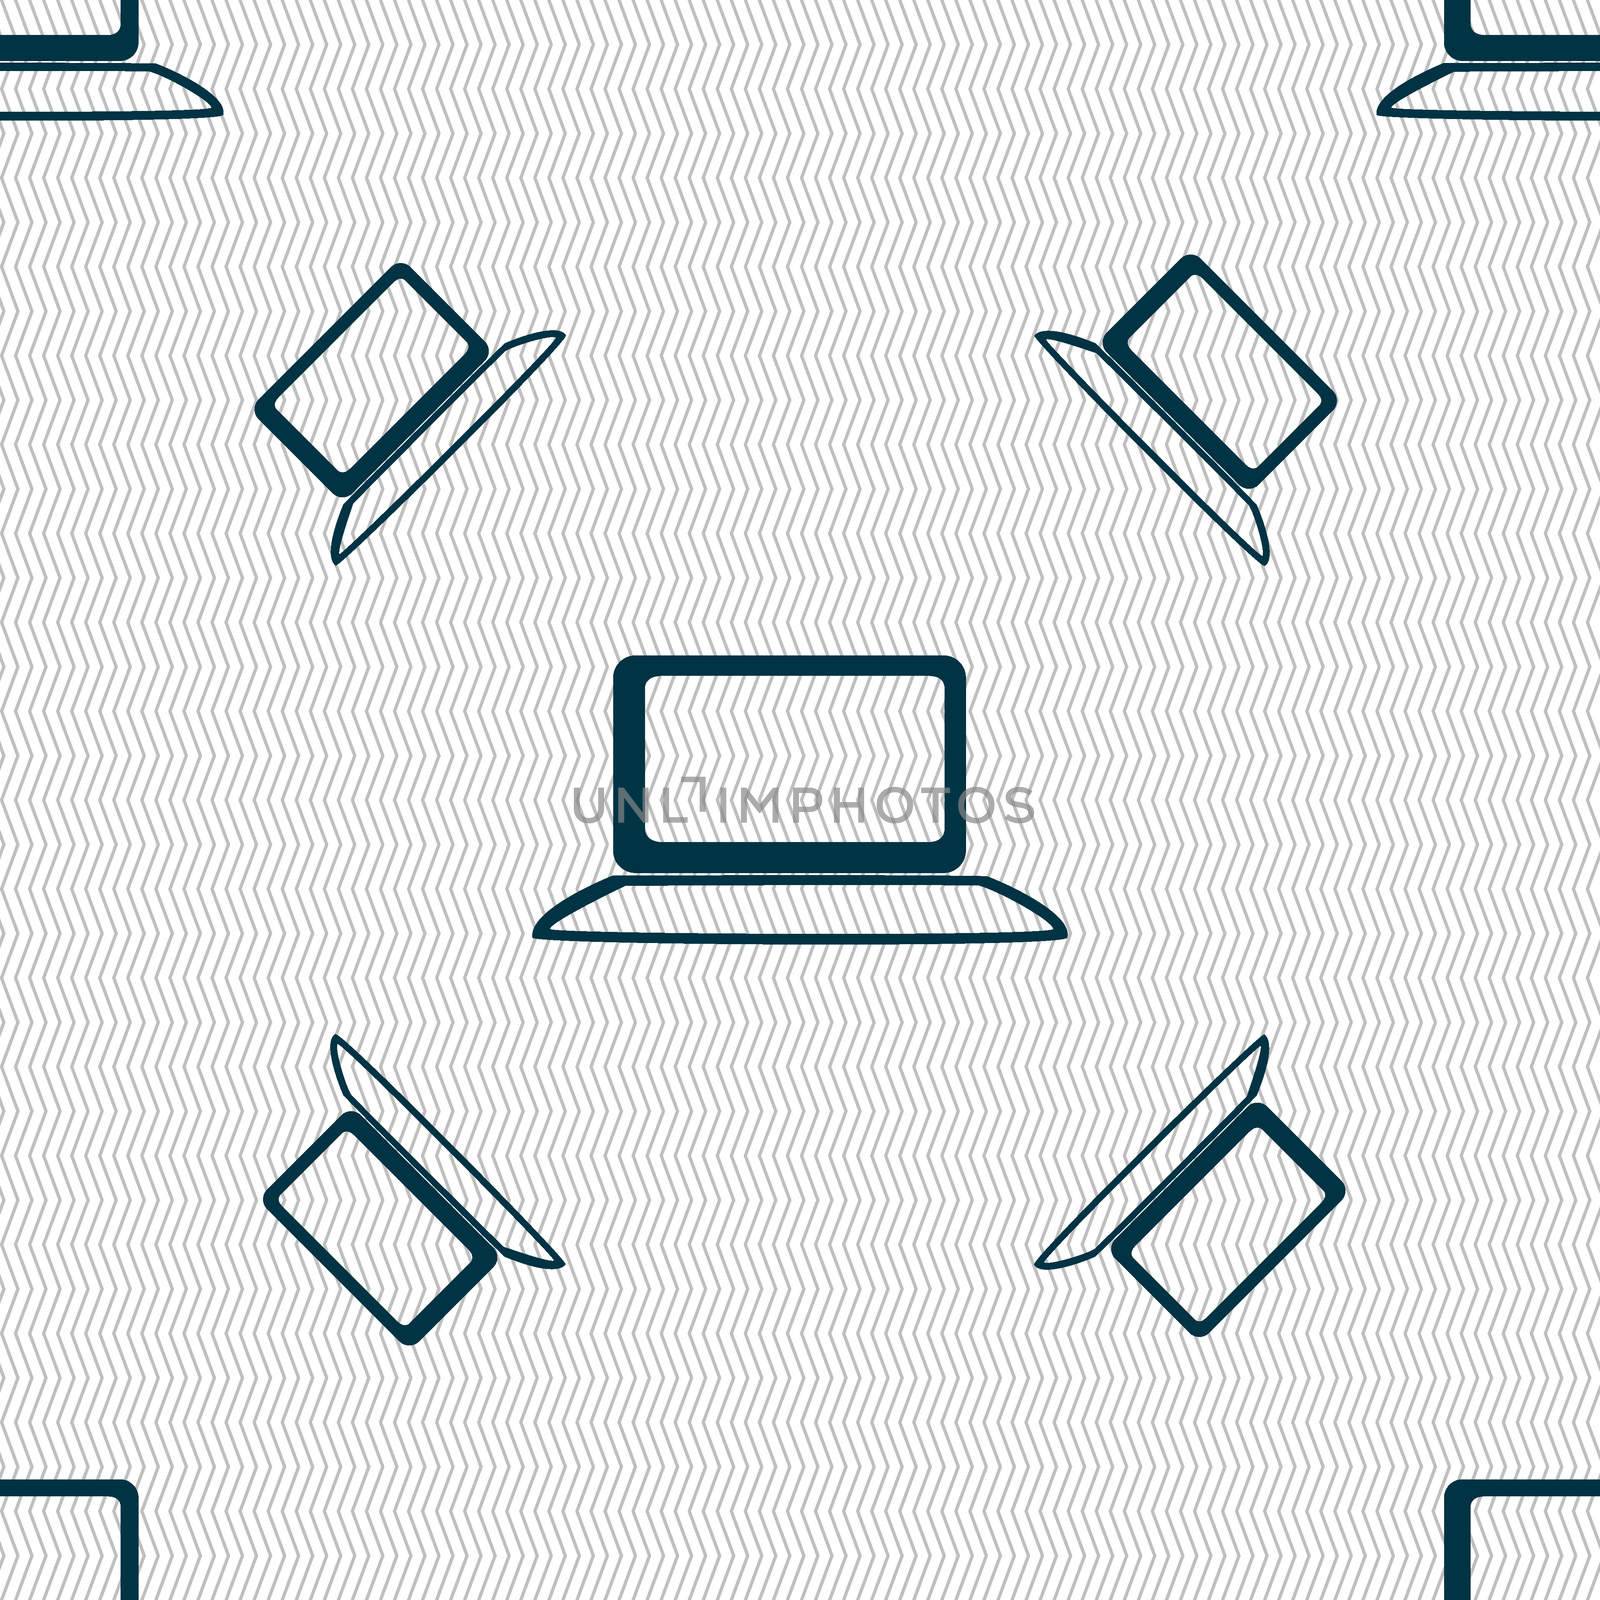 Laptop sign icon. Notebook pc with graph symbol. Monitoring. Seamless pattern with geometric texture. illustration